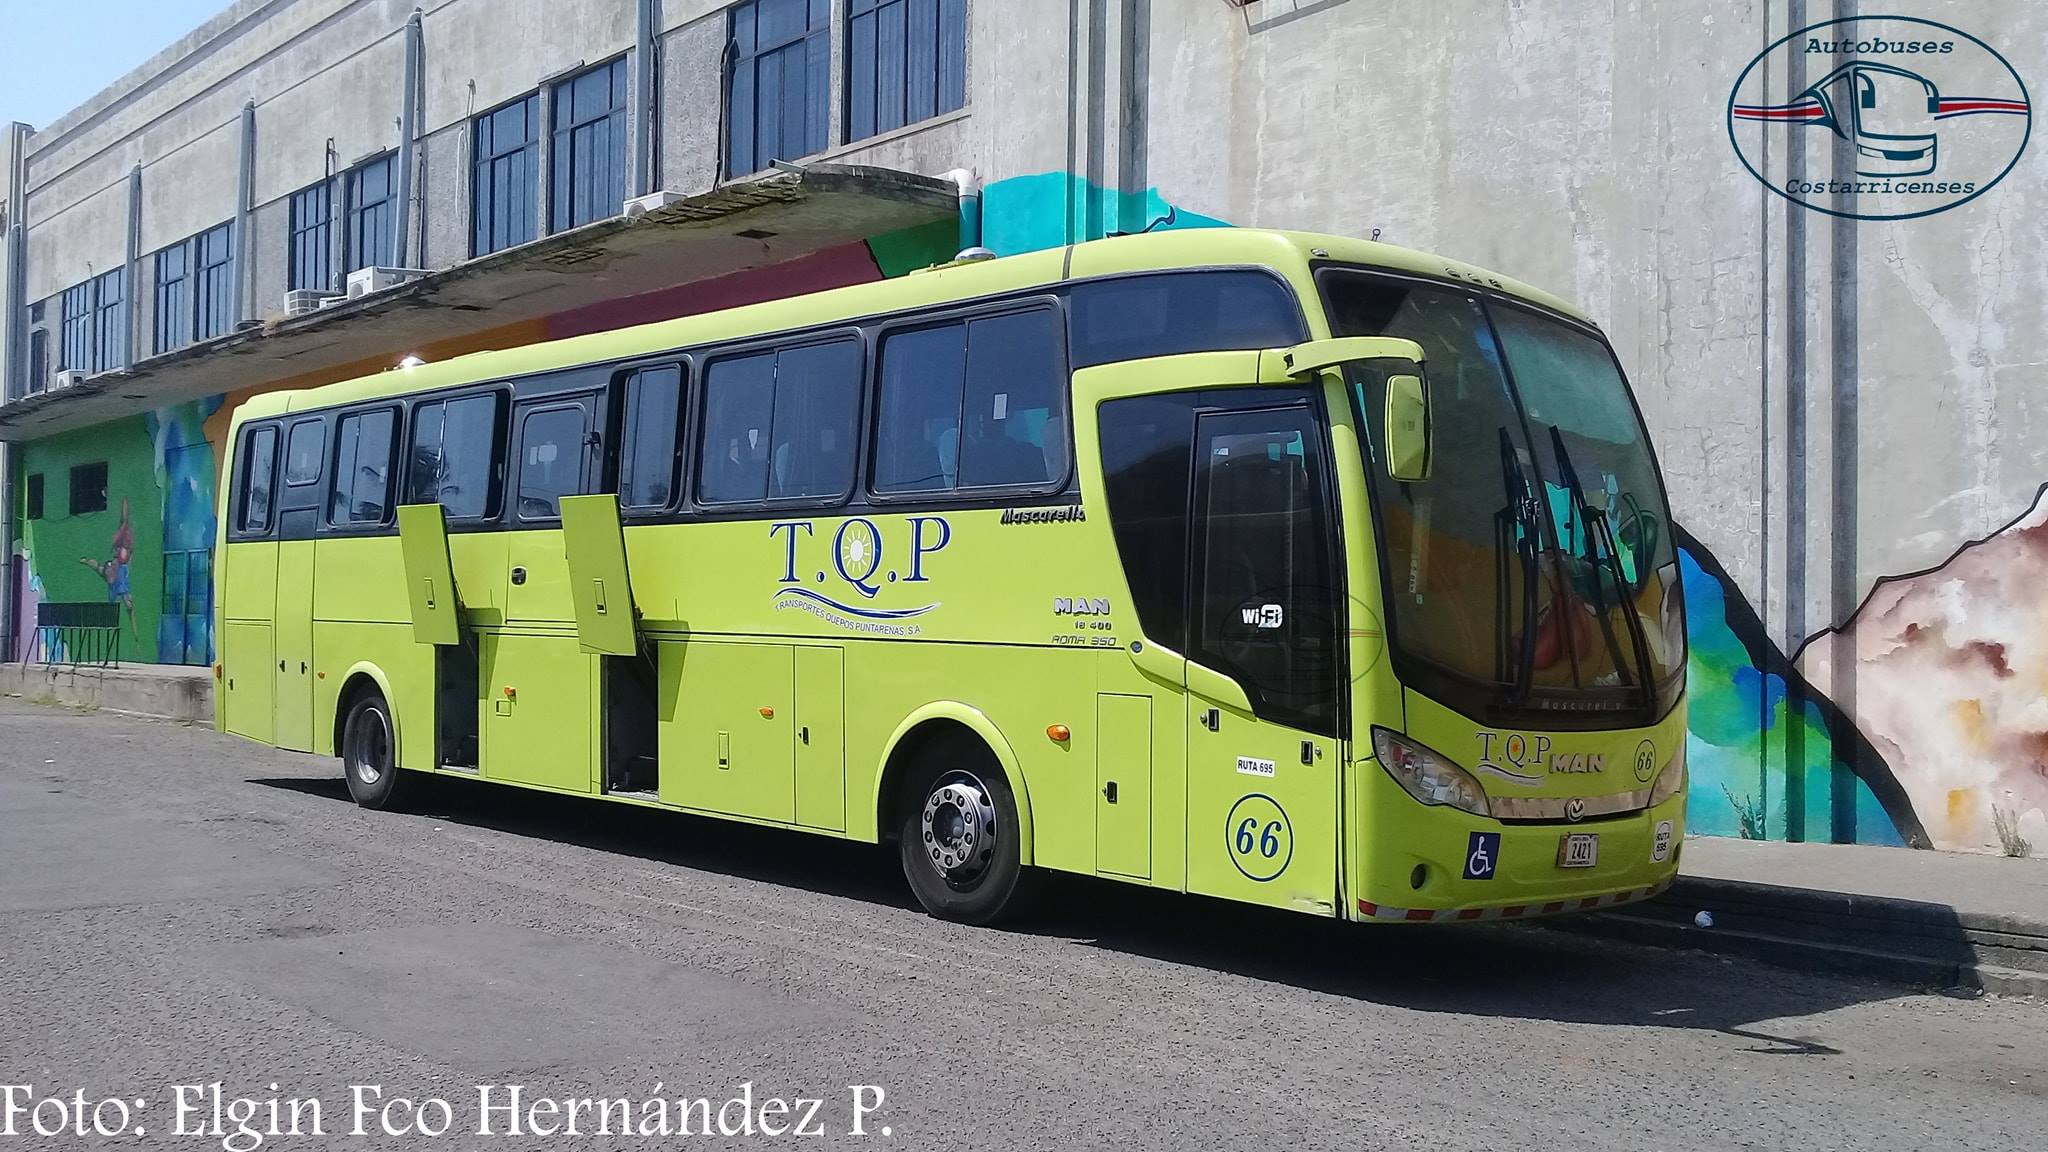 How To Get From Jaco To Tamarindo - All Possible Ways, cheapest way from Jaco to Tamarindo, Tamarindo to Manuel Antonio, Jaco to Tamarindo bus, Jaco Beach to Tamarindo bus, Puntarenas to Liberia bus, Liberia to Tamarindo bus, Jaco to Puntarenas bus